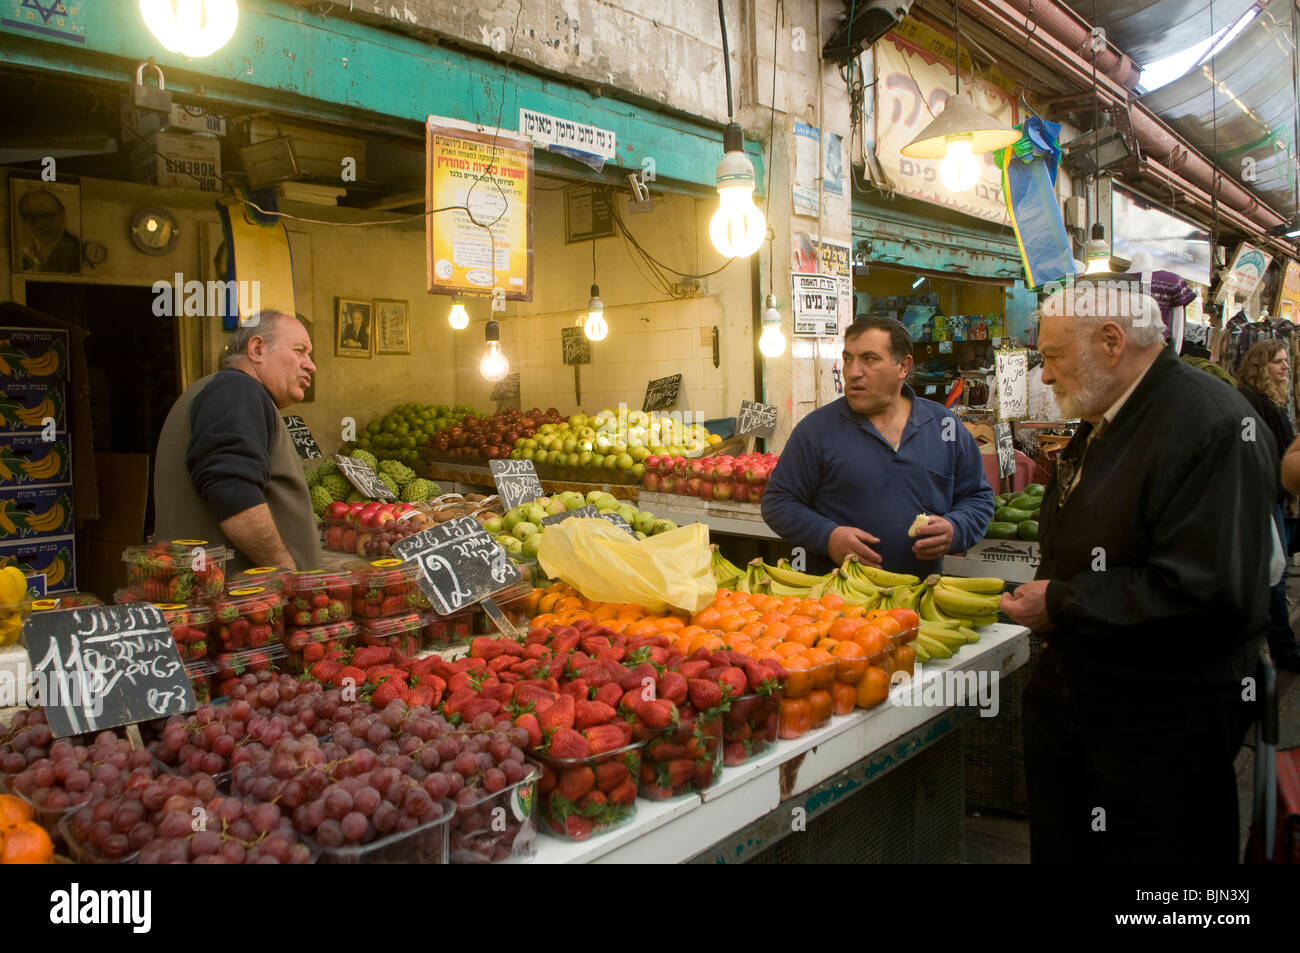 Vendors in Mahane or Machane Yehuda market often referred to as 'The Shuk', an open-air, marketplace in West Jerusalem, Israel Stock Photo